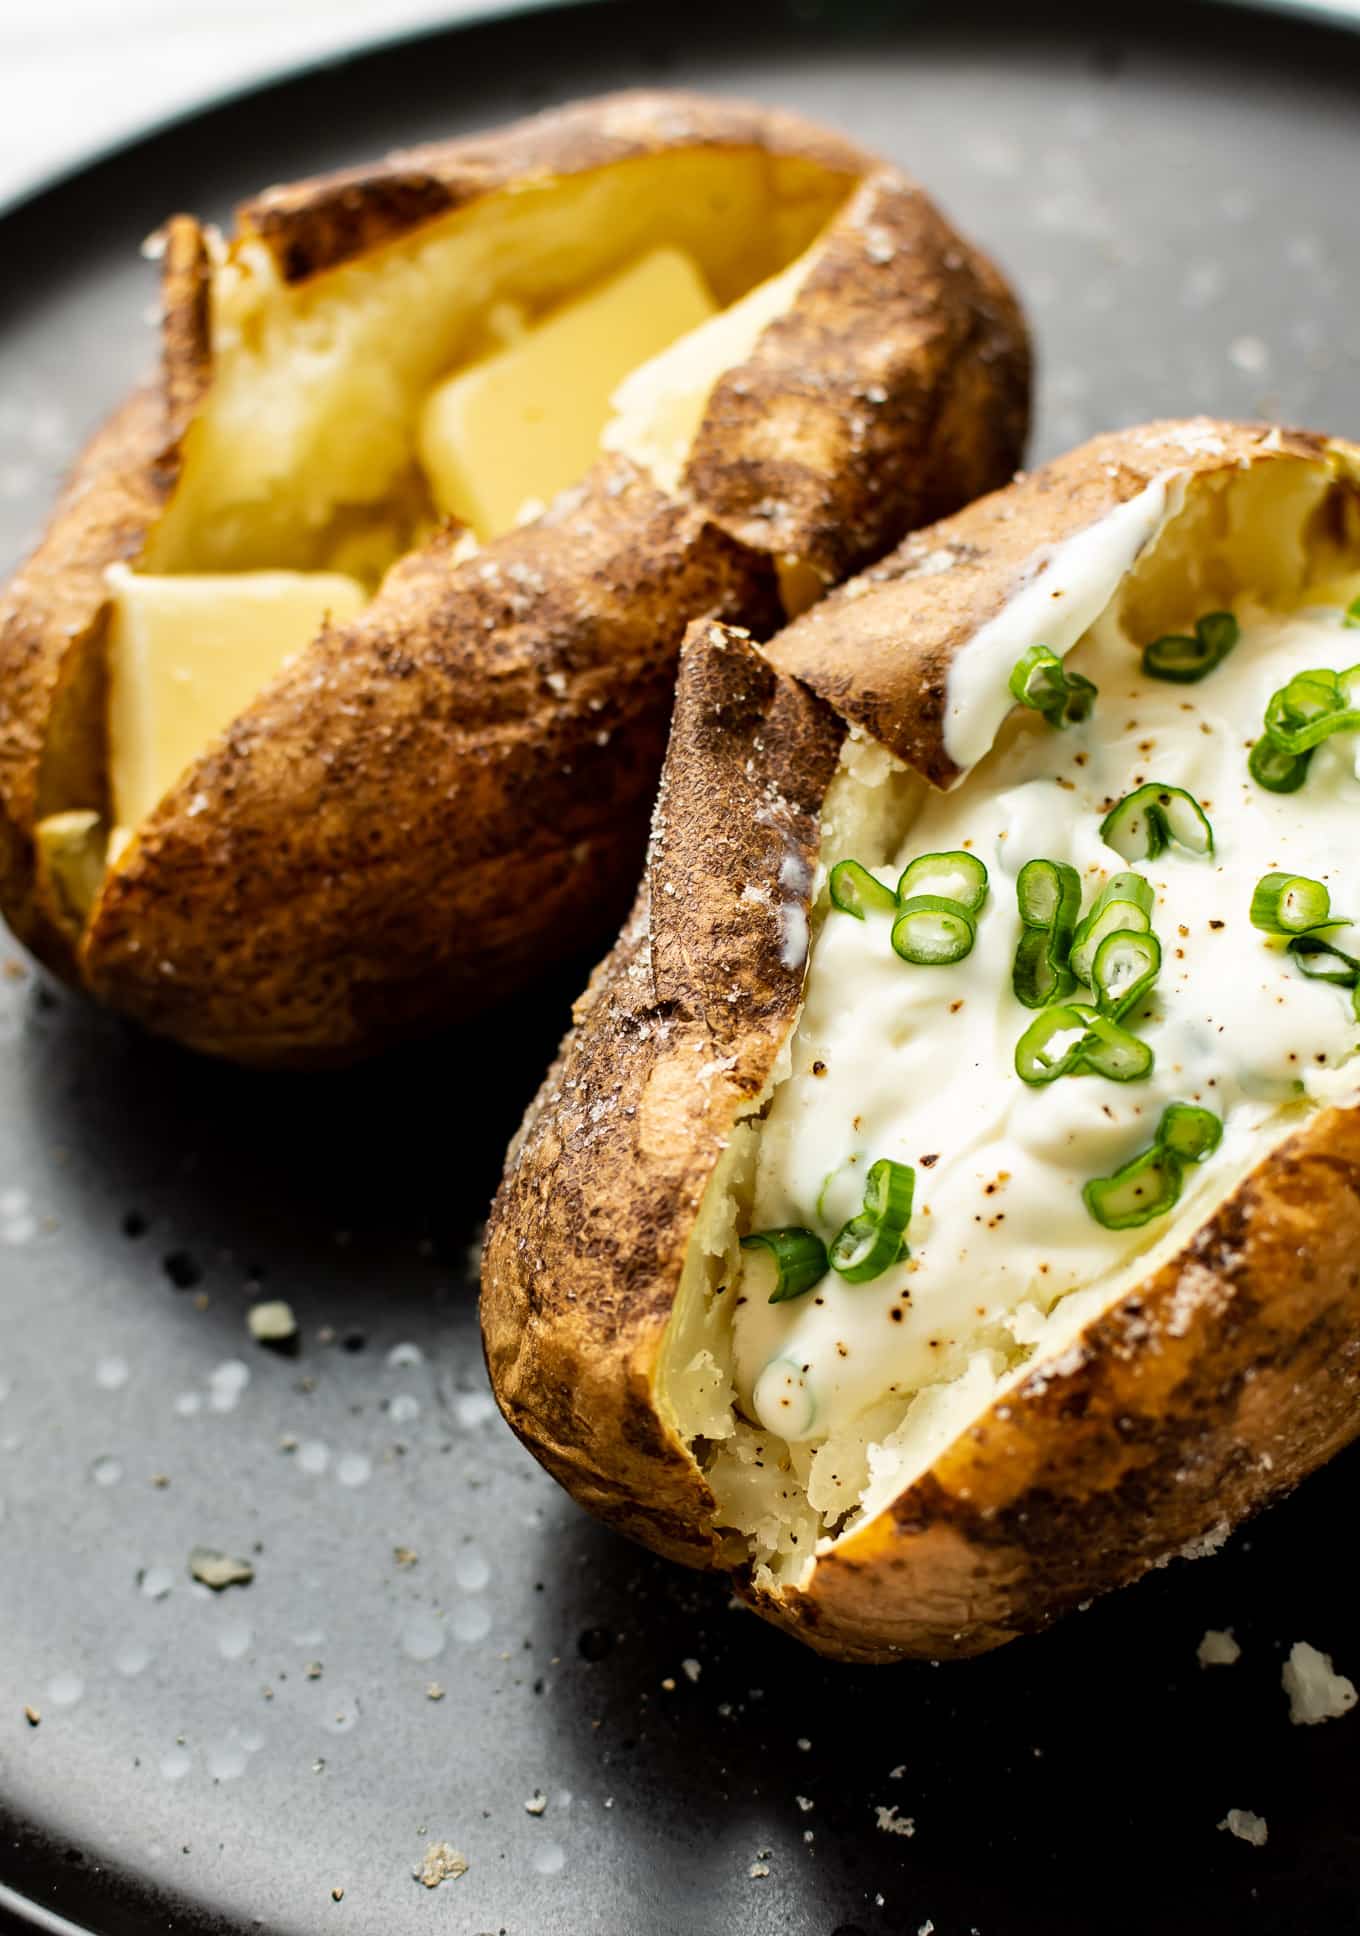 PERFECT Baked Potato Recipe - How Long to Cook a Baked Potato in